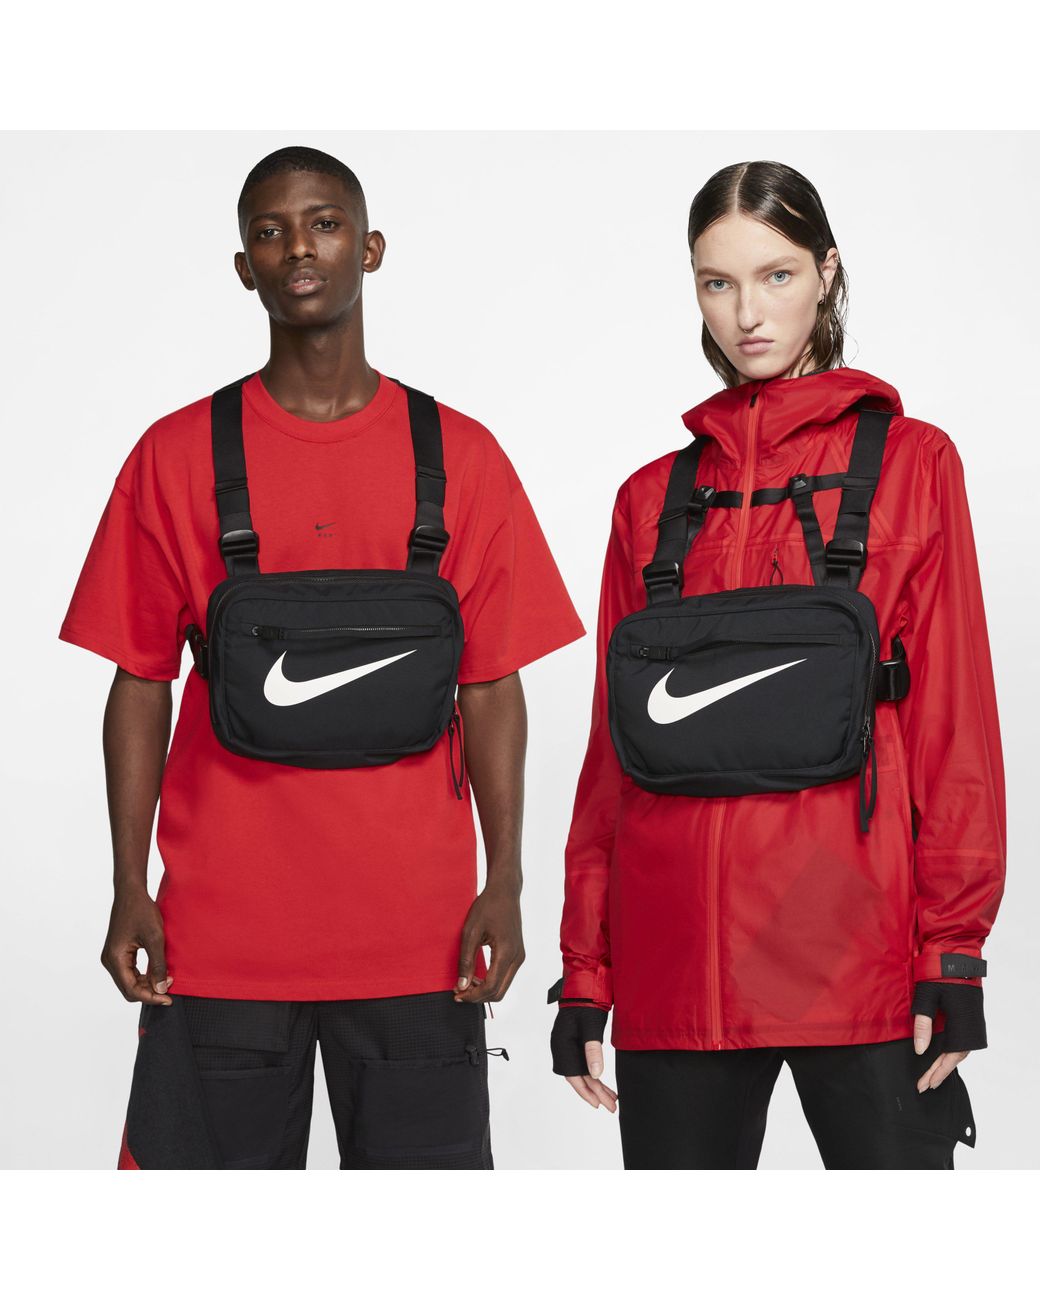 NEW STYLE MINI CHEST BAG OF NIKE  FOX Online STORE  Facebook